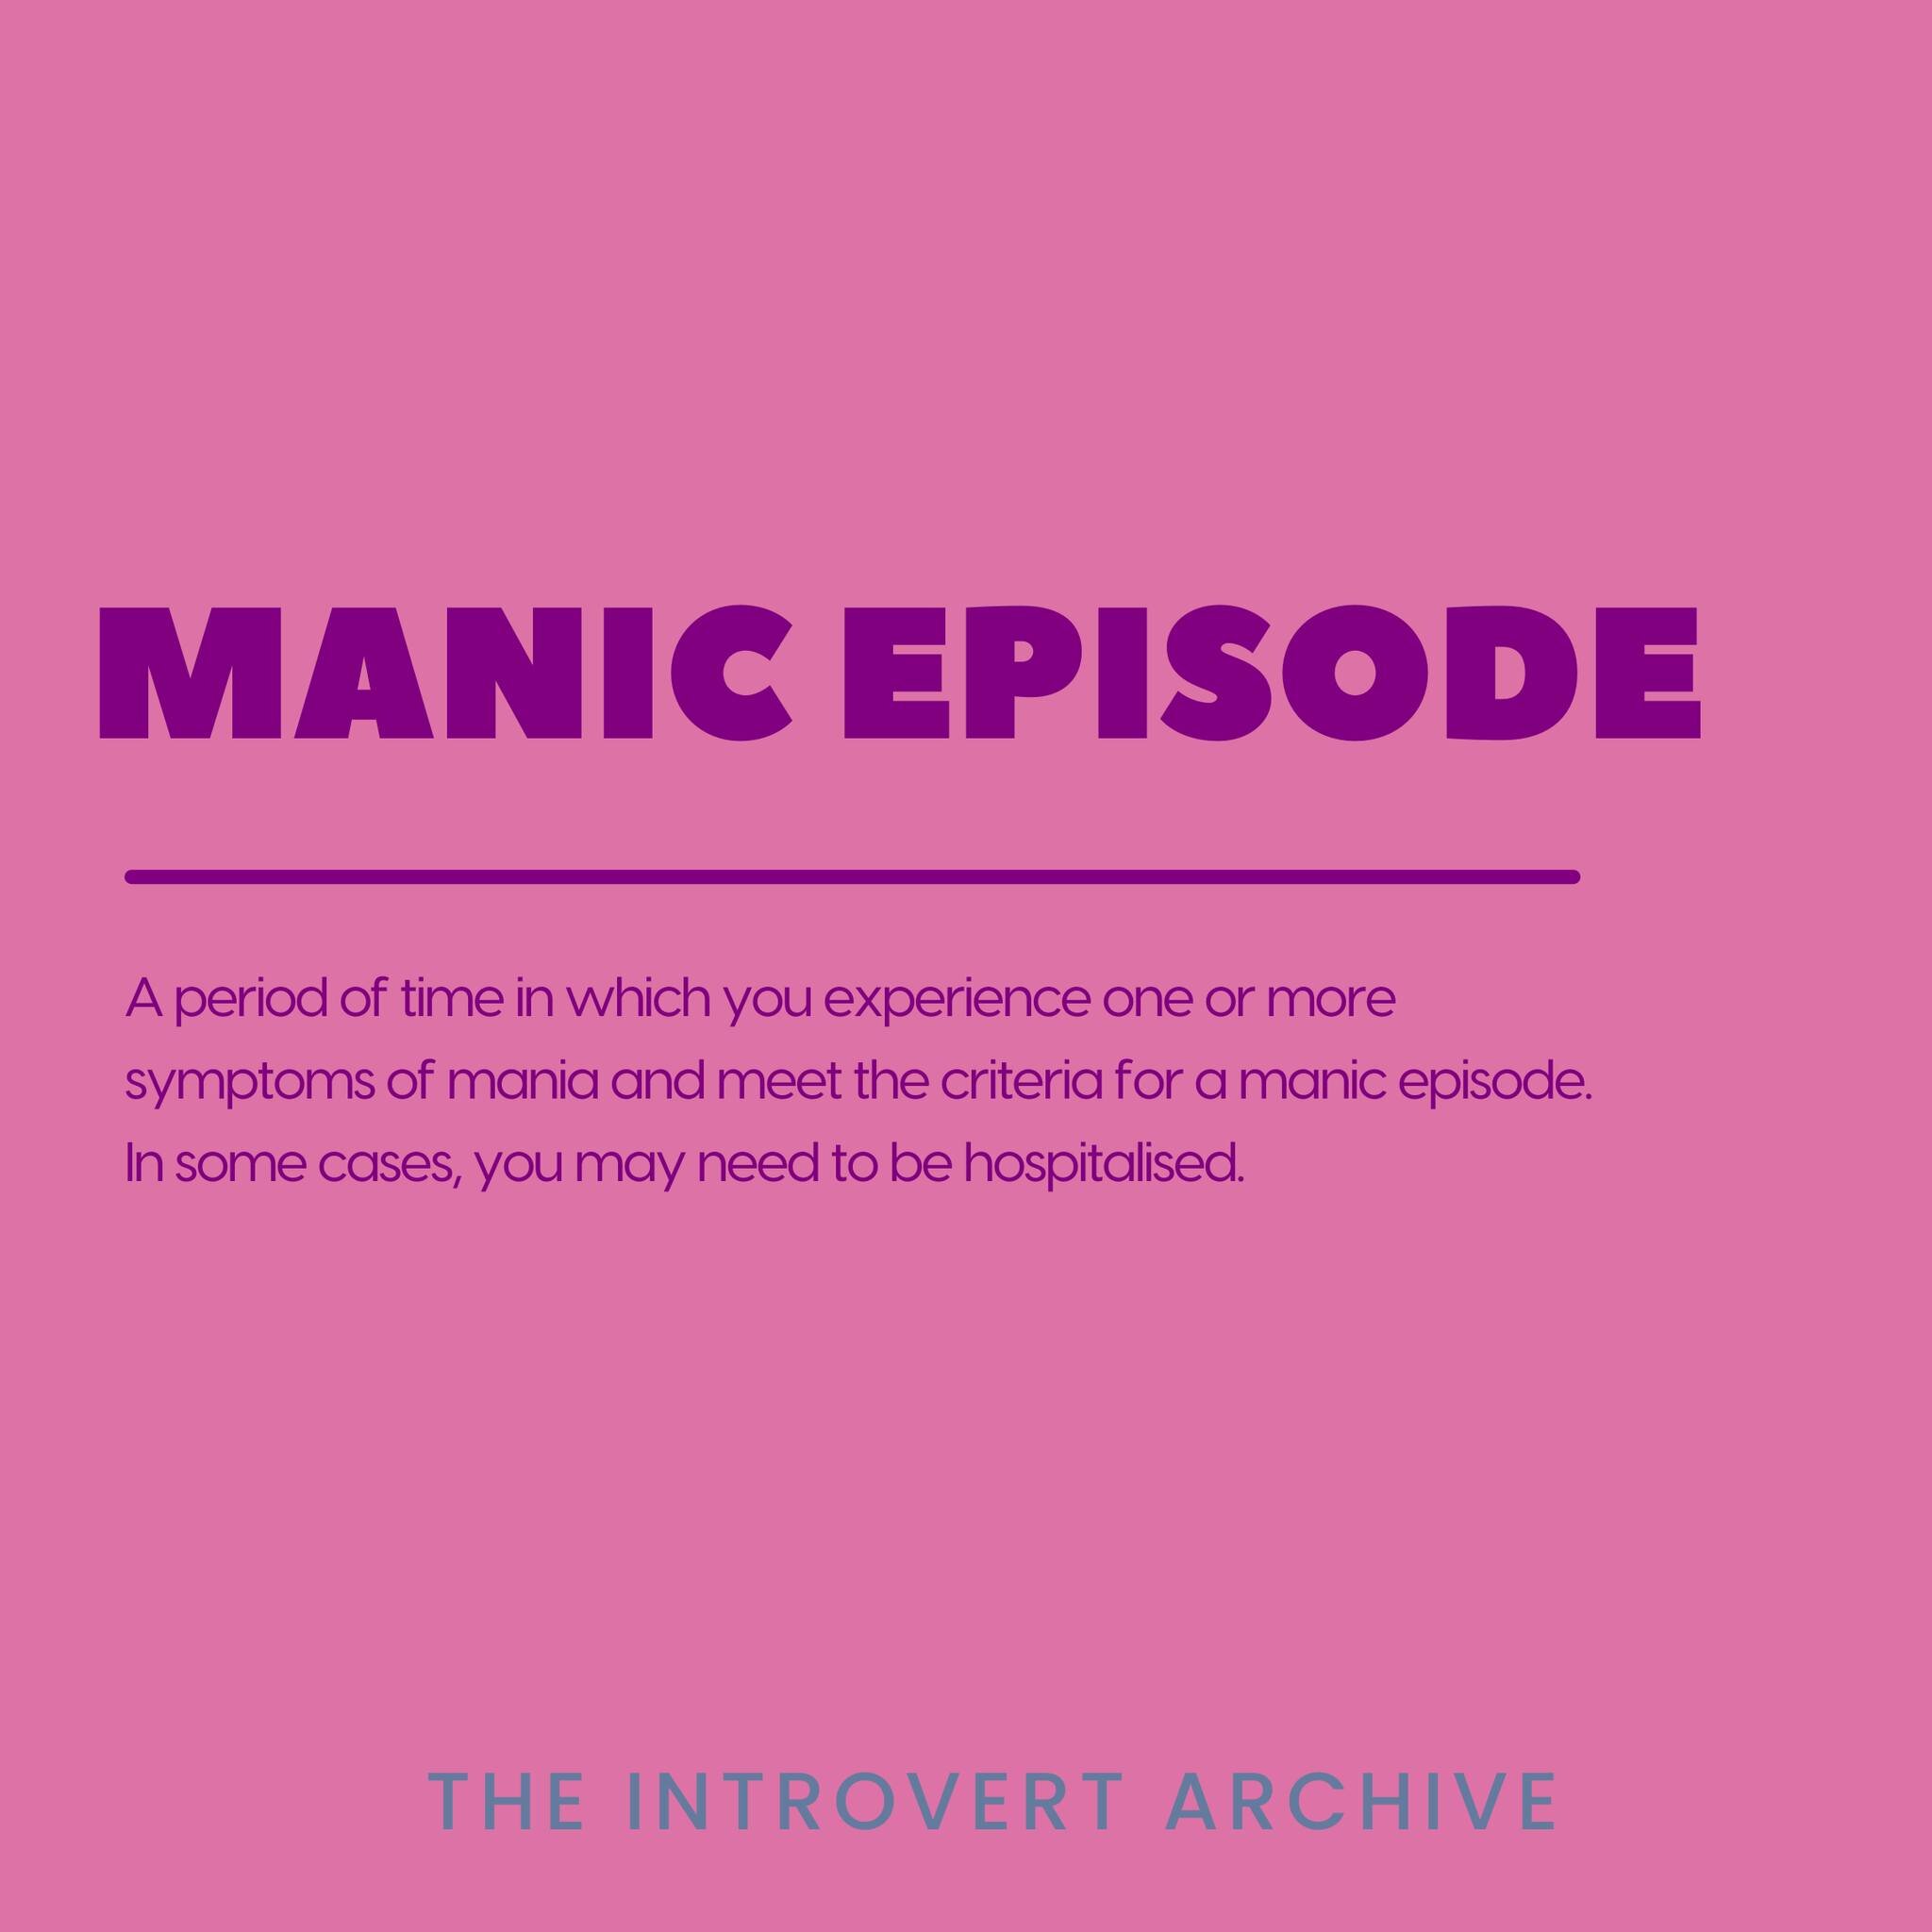 Mania and manic episodes are scary, but you are able to live with them and effectively manage them. Medications, talk therapy and coping / management strategies are effective for people experiencing a manic episode. 

It is important that we are educ